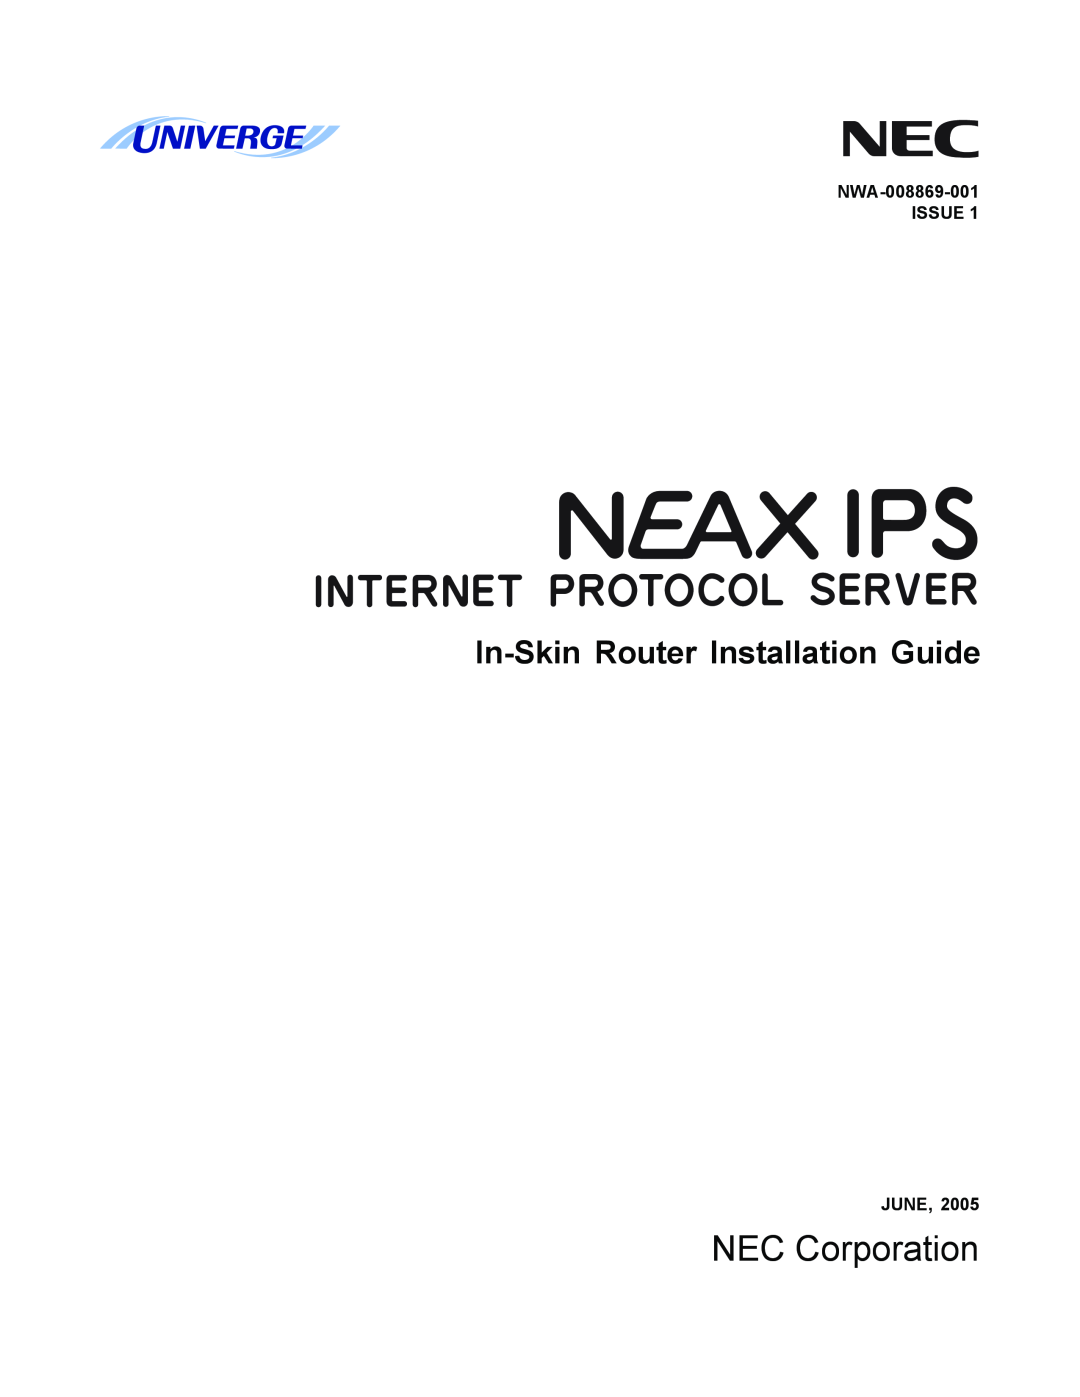 NEC manual NEC Corporation, In-Skin Router Installation Guide, NWA-008869-001 ISSUE, June 